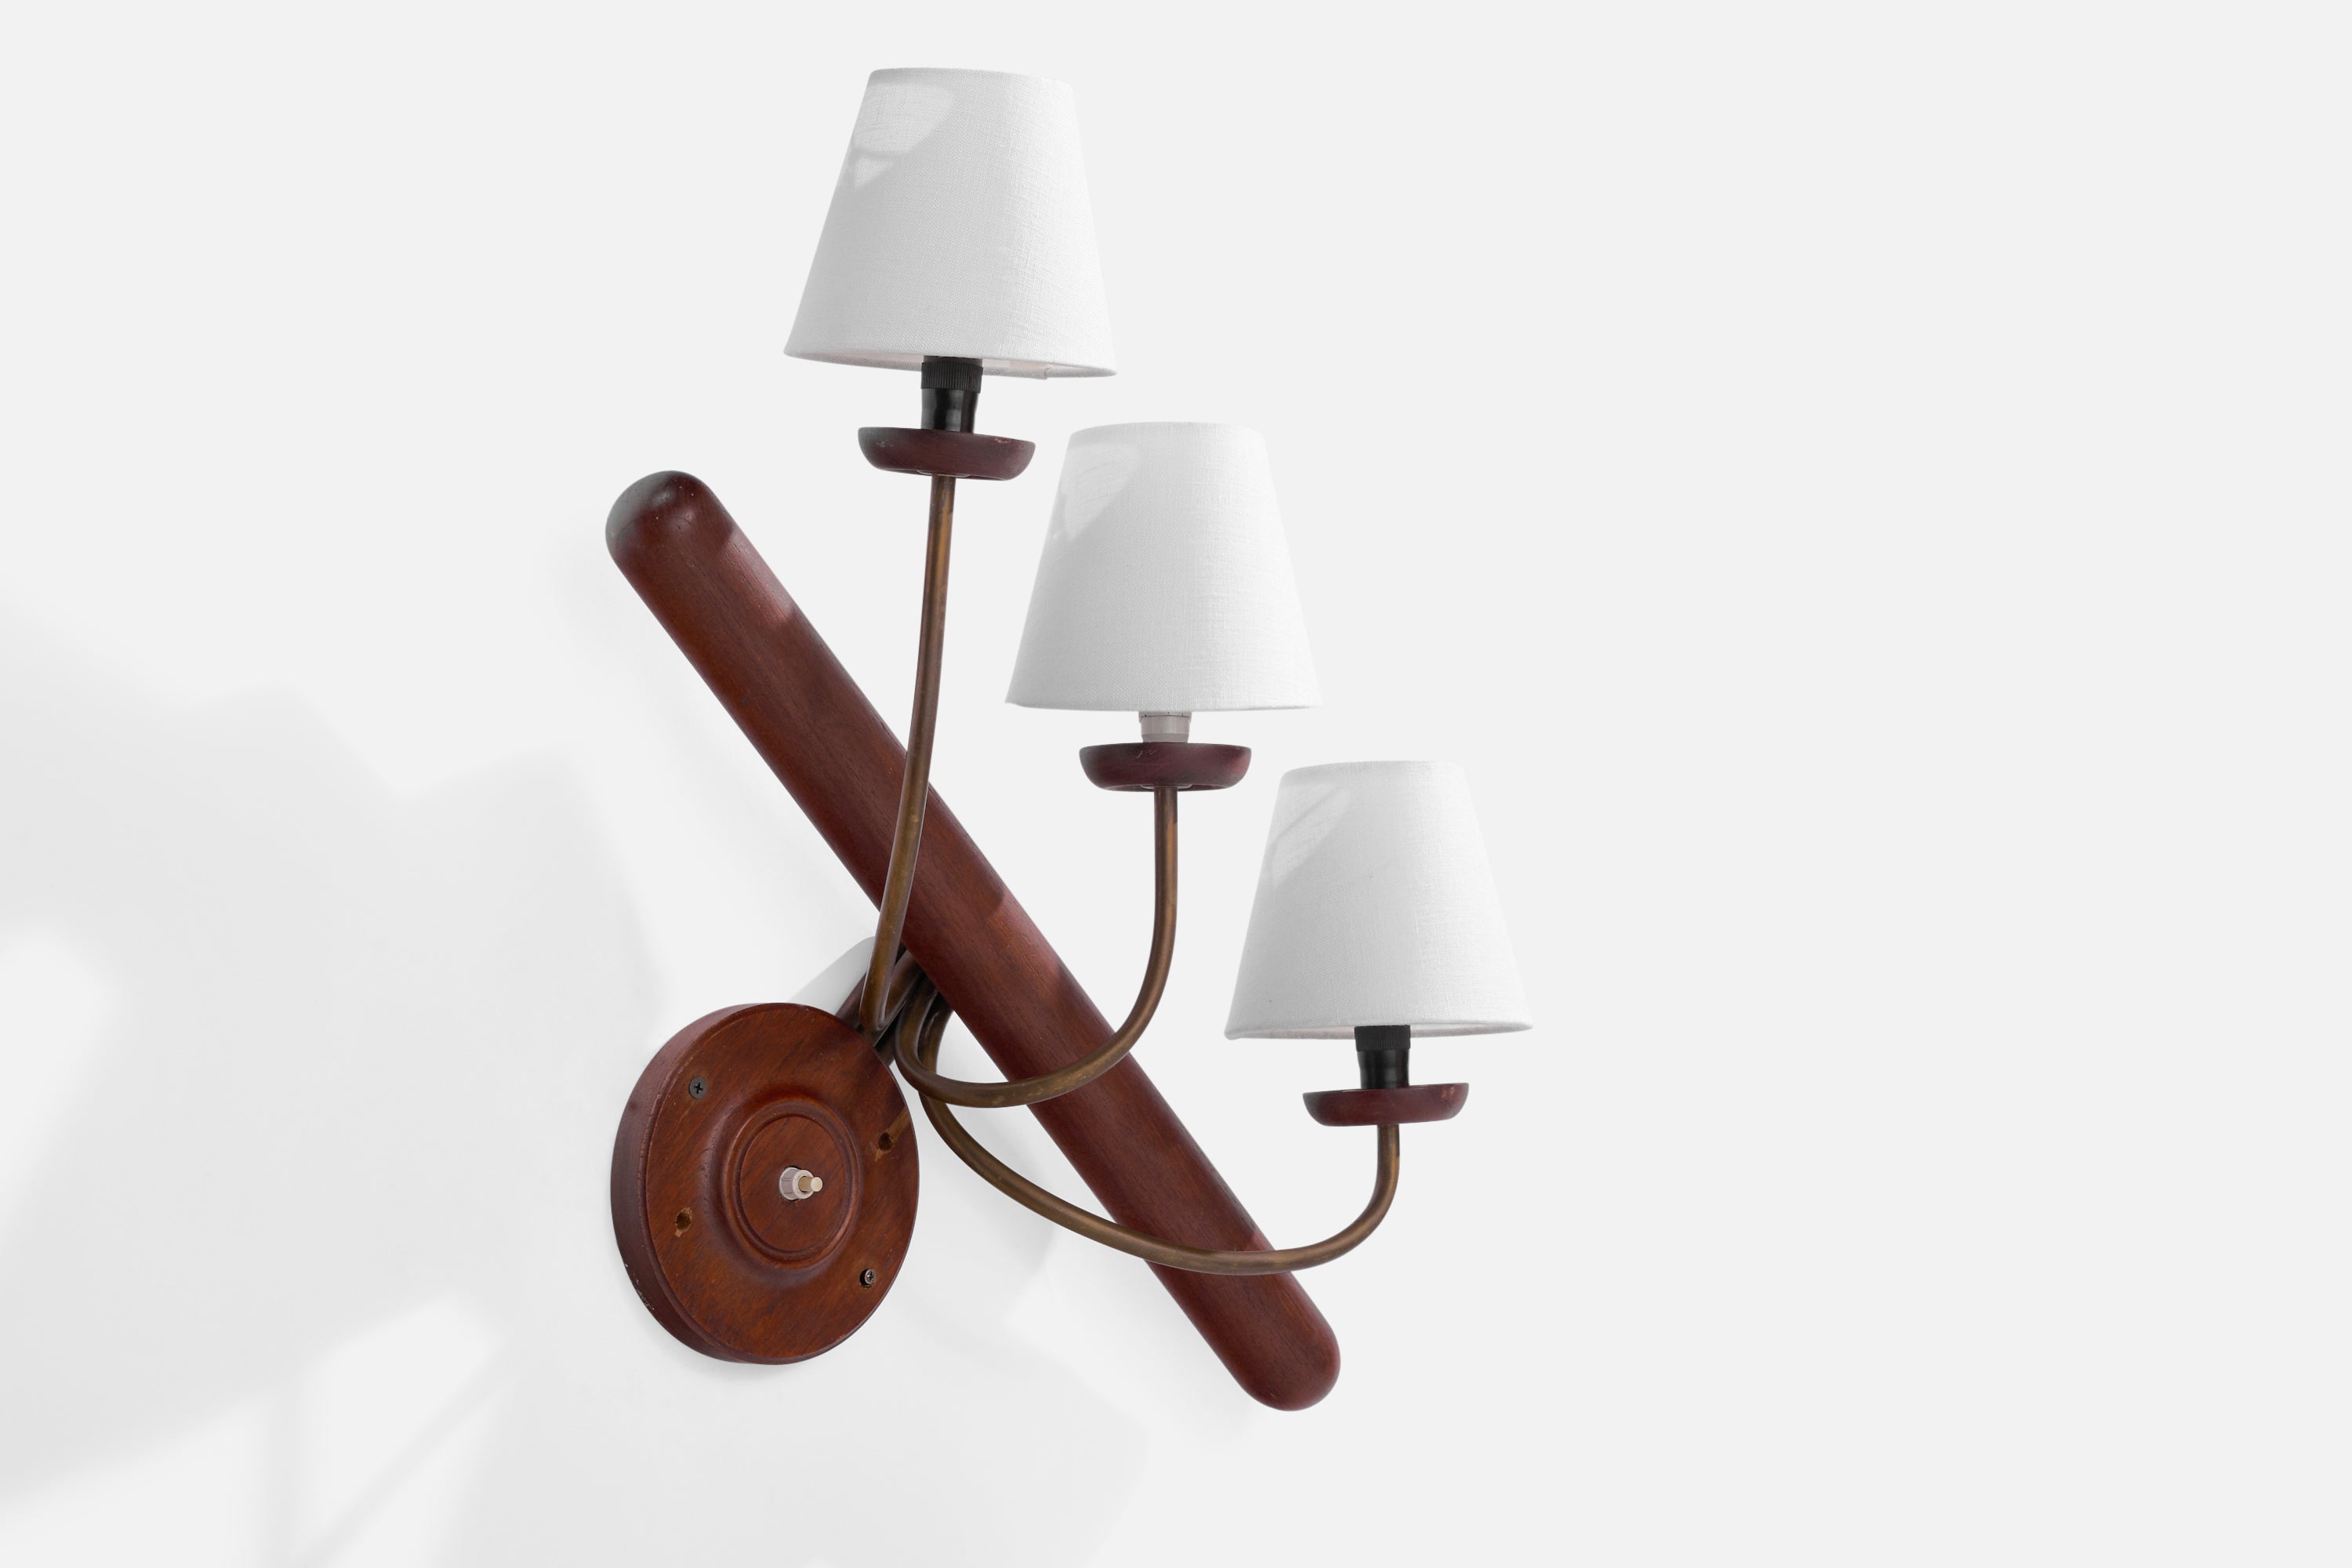 A three-armed brass, teak and white fabric wall light designed and produced in Sweden, 1950s.

Overall Dimensions (inches): 21” H x 19” W x 8.75”  D
Back Plate Dimensions (inches): 5.75”H x 5.75”  W x .75” D
Bulb Specifications: E-14 Bulb
Number of